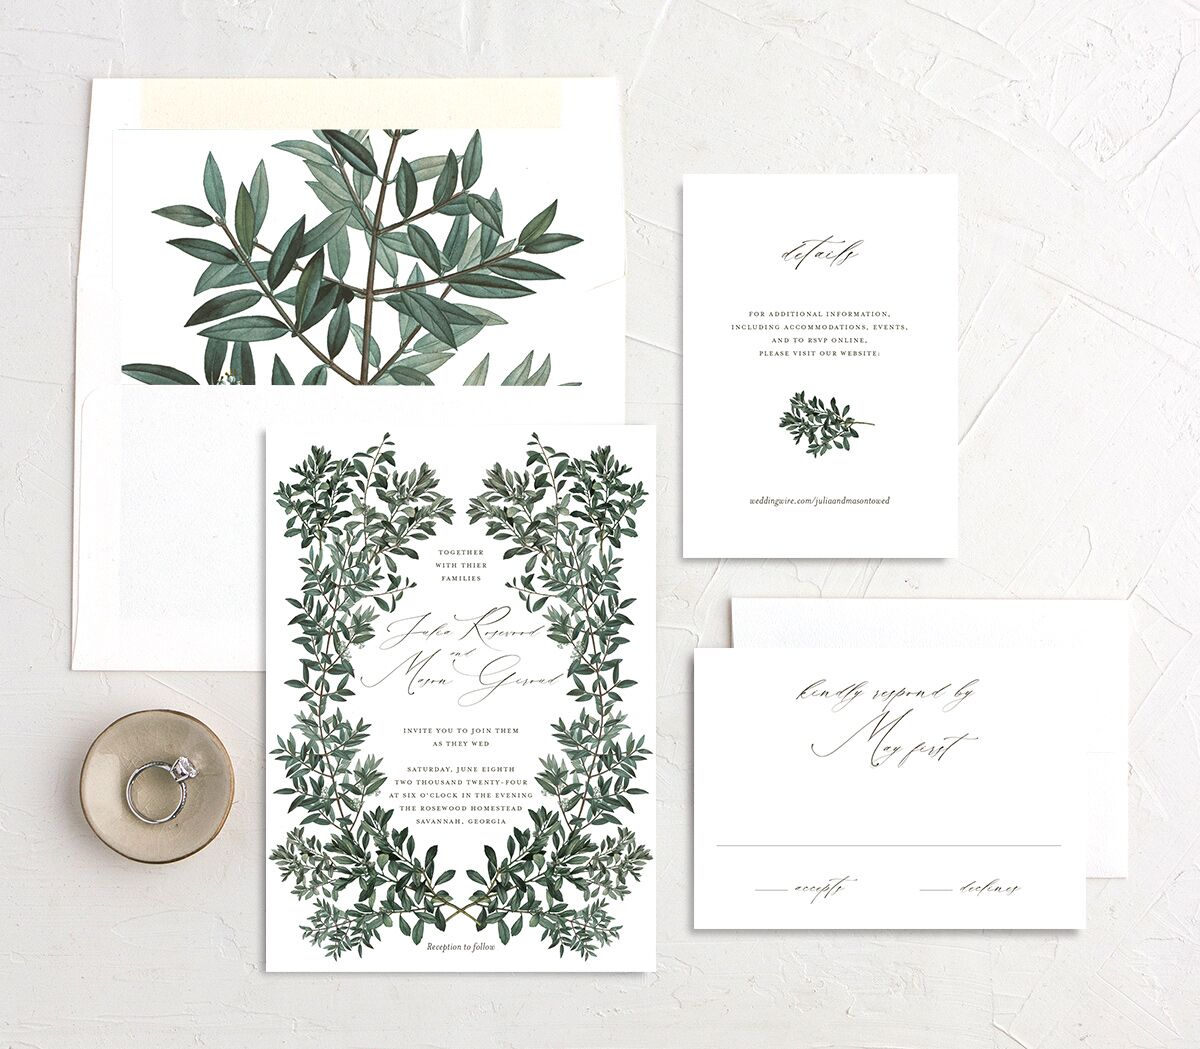 Ornate Leaves Wedding Invitations suite in Pure White